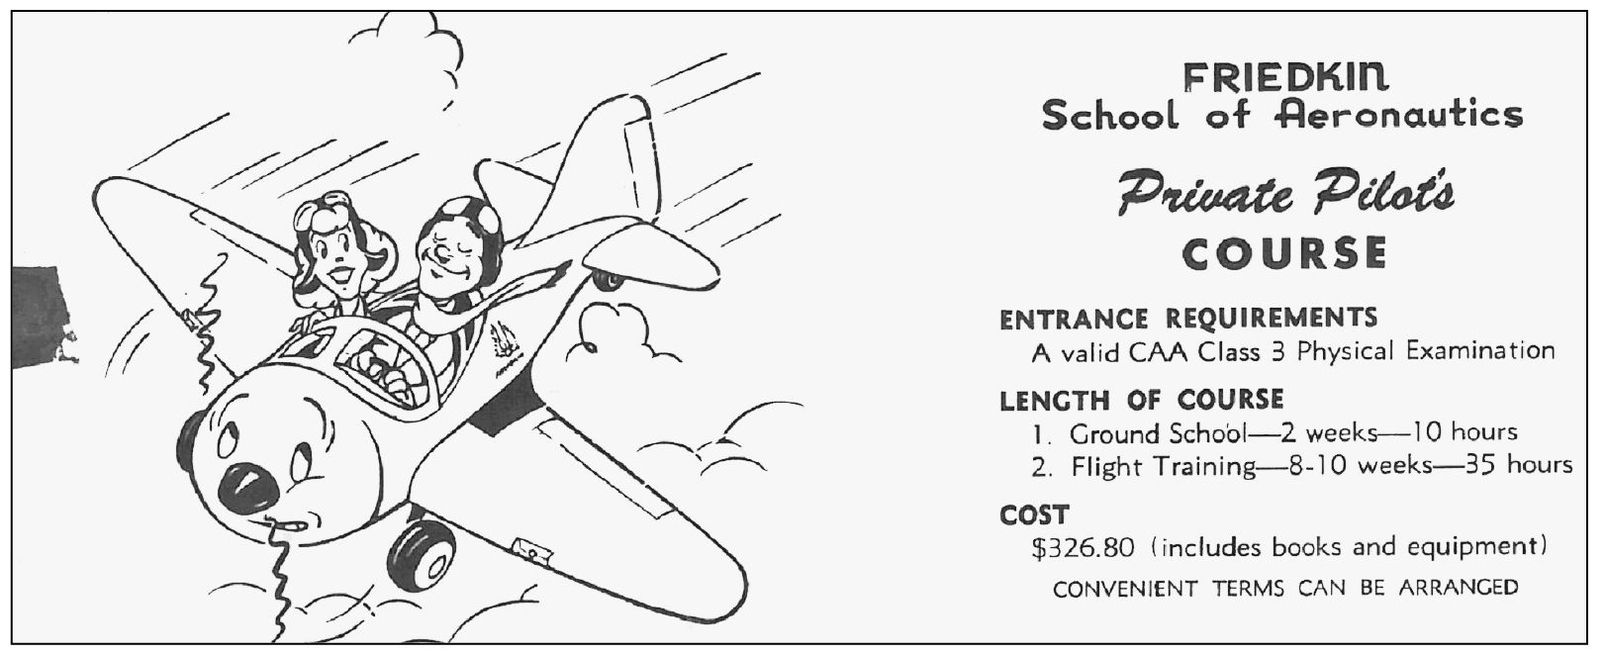 This Friedkin advertisement is for the private pilot course The price for a - photo 7